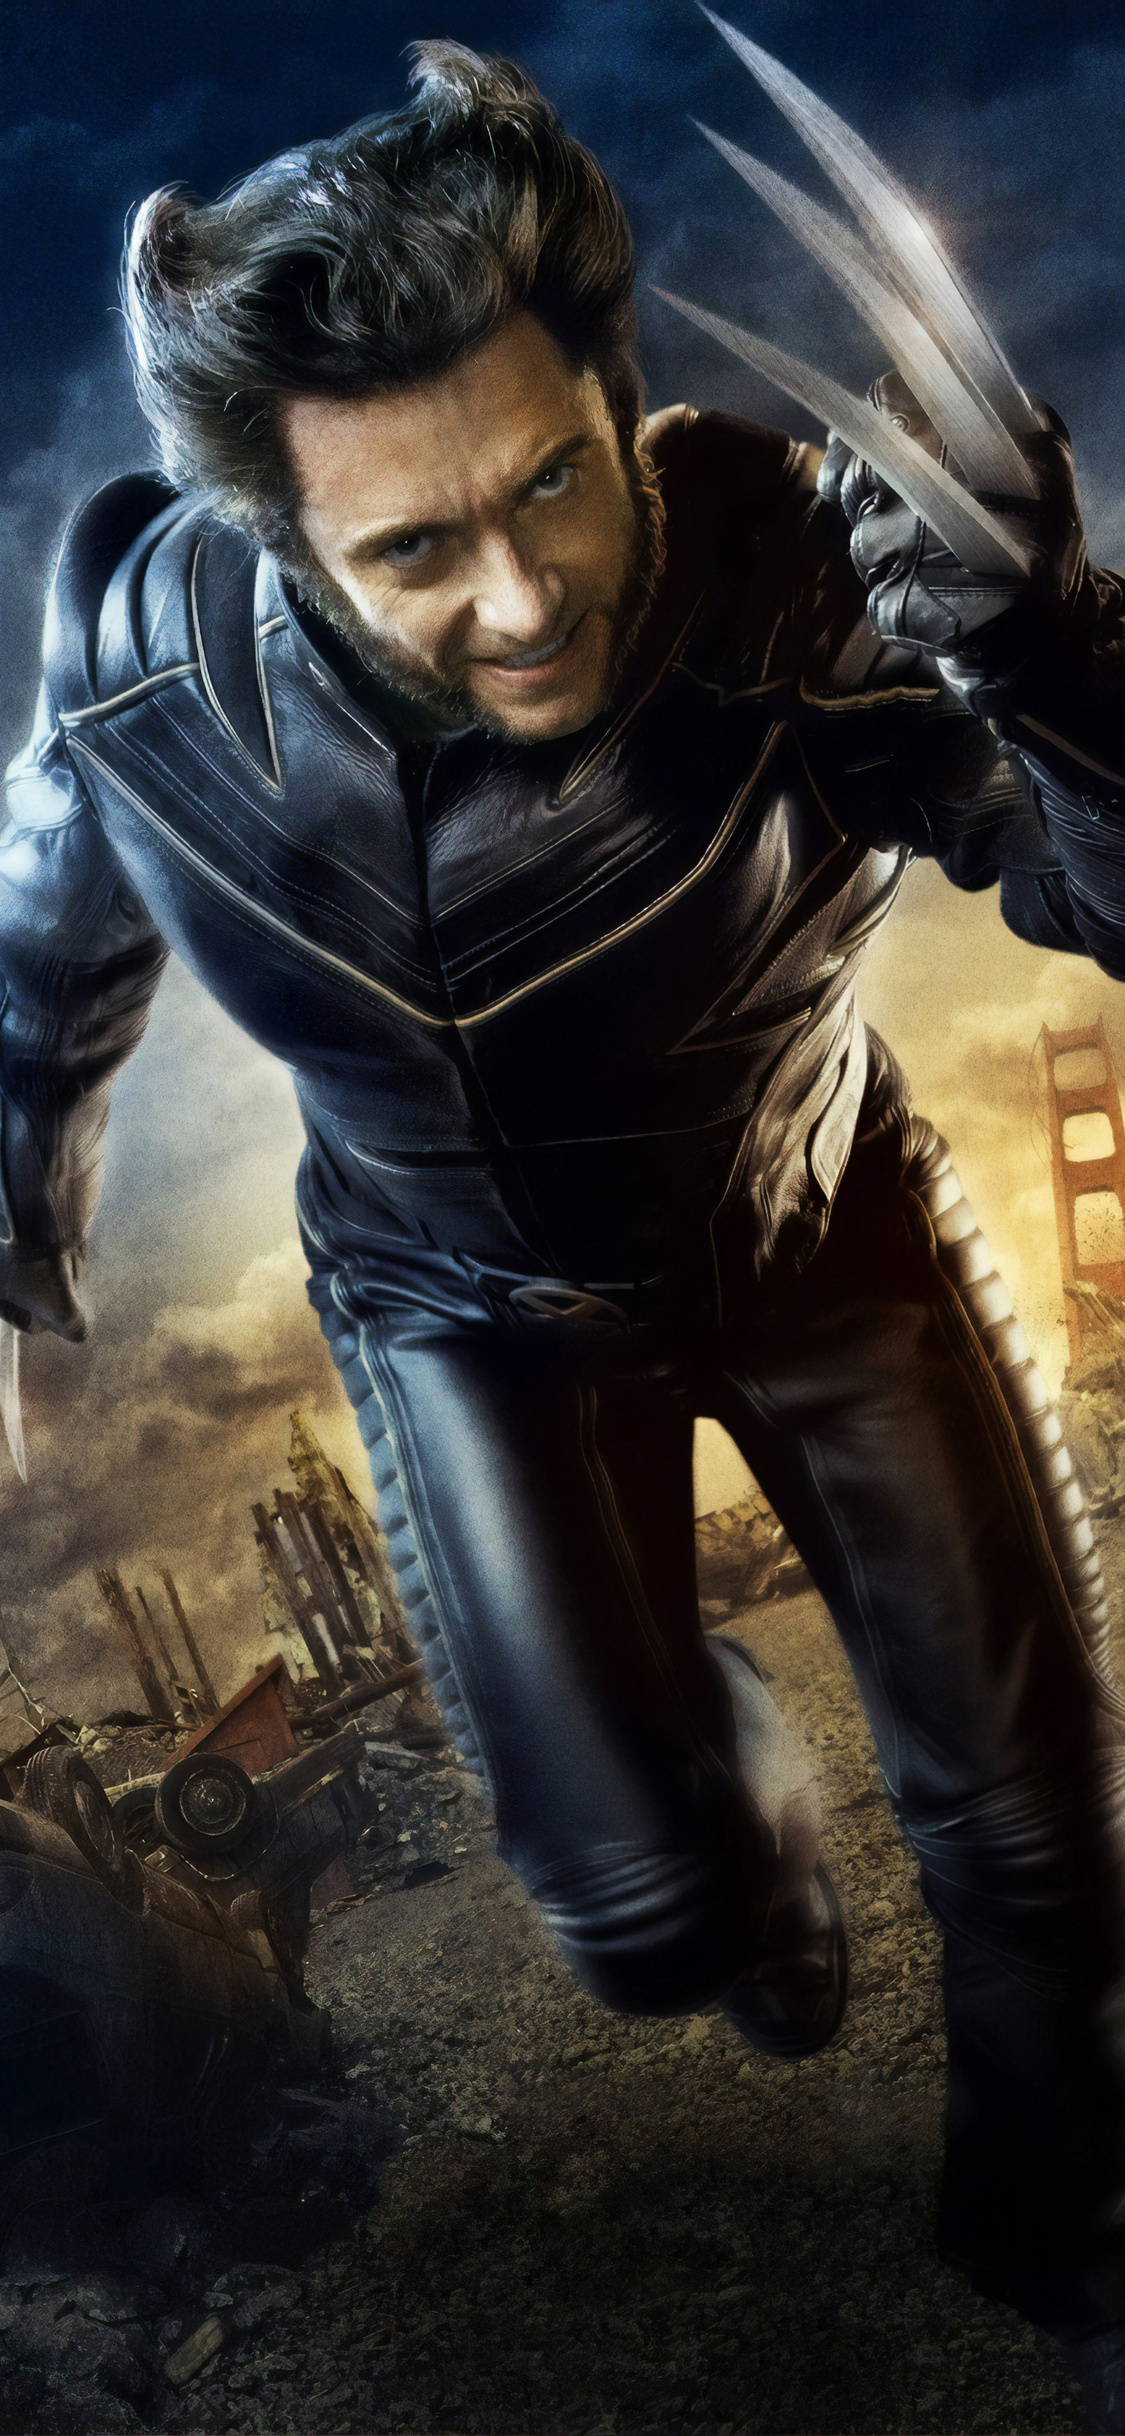 X-Men: The Last Stand, Wolverine on iPhone, High-definition wallpapers, Superhero in action, 1130x2440 HD Phone